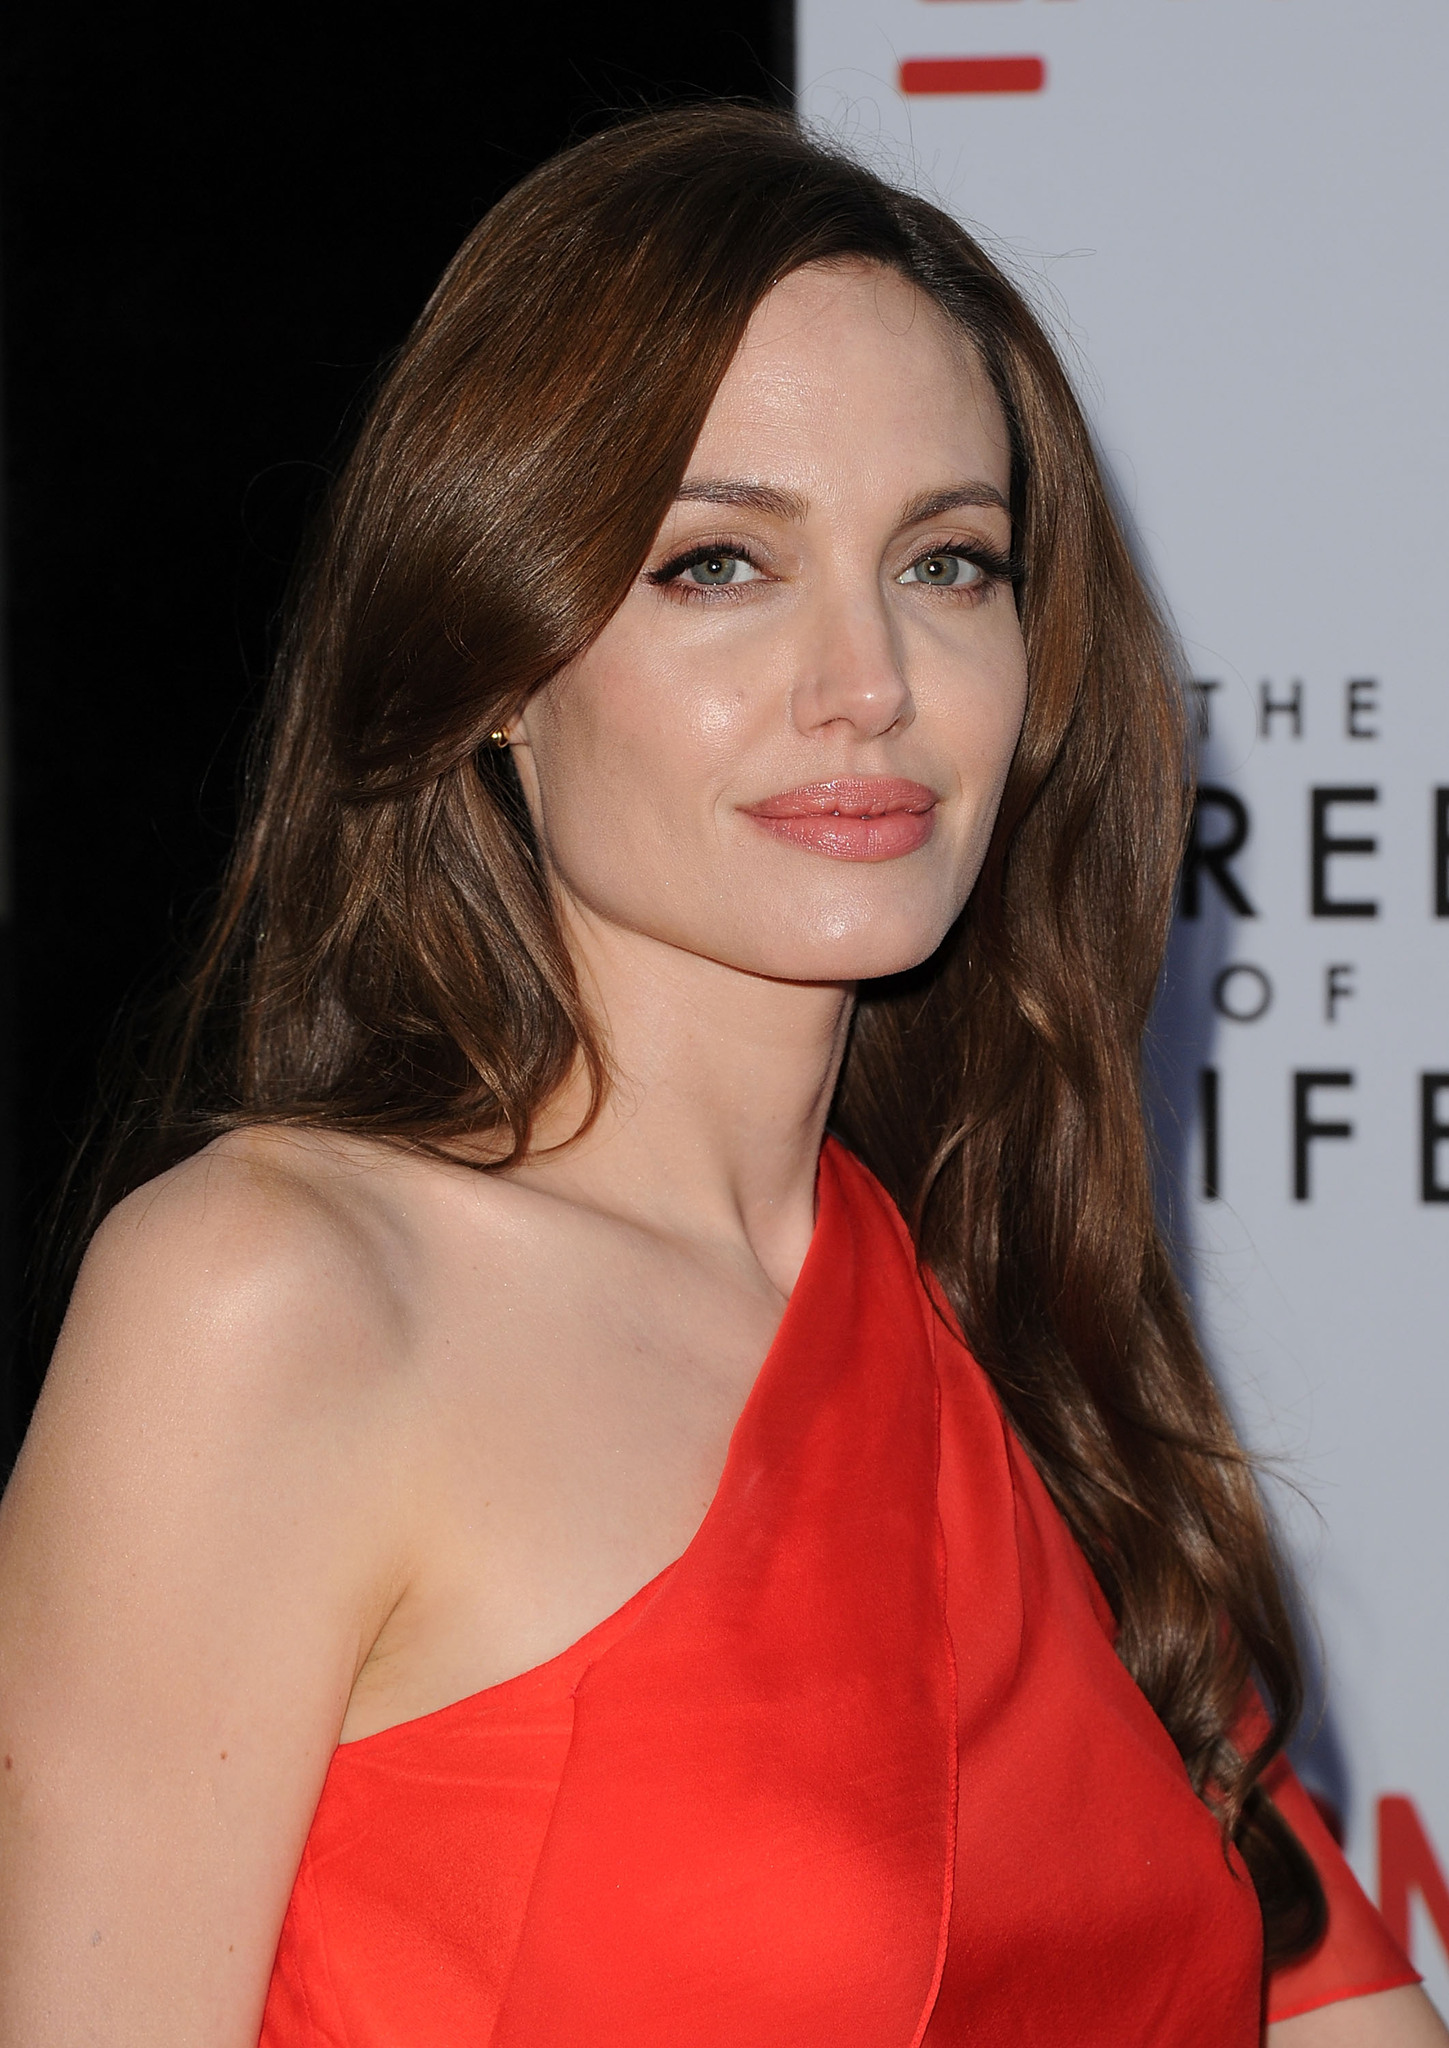 Angelina Jolie at event of The Tree of Life (2011)